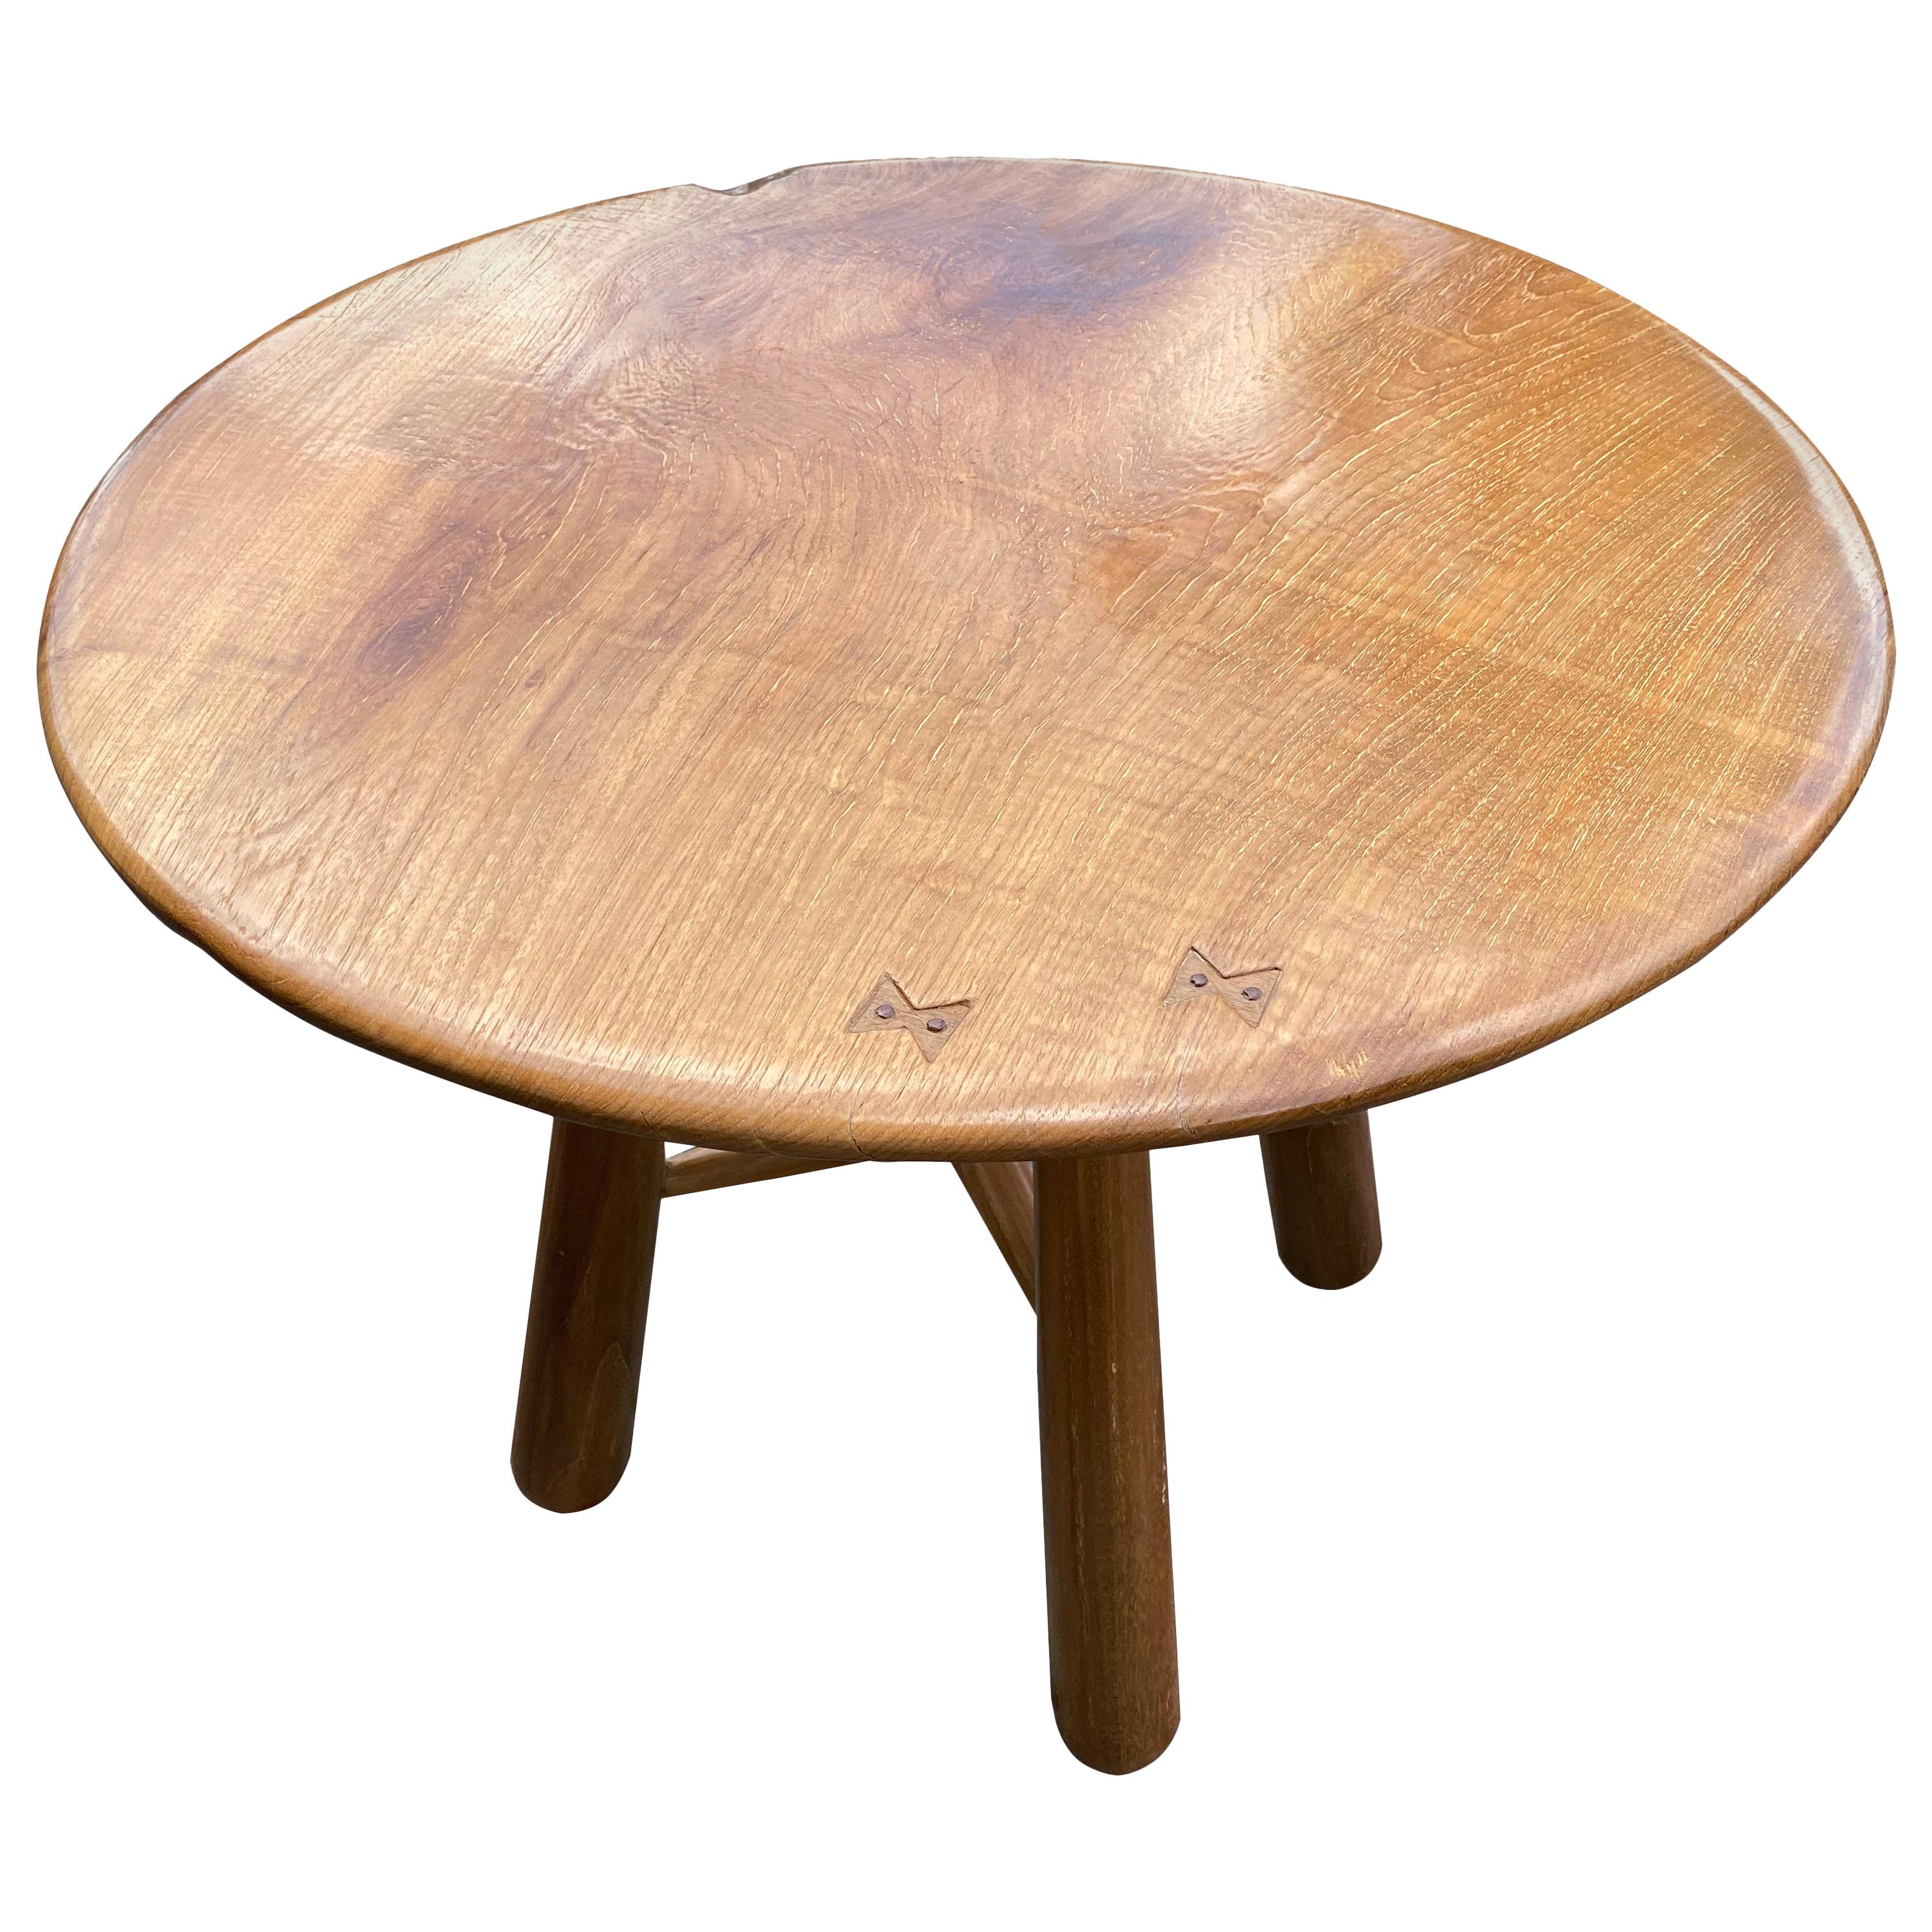 Andrianna Shamaris Midcentury Couture Round Teak Table with Butterflies Inlaid For Sale